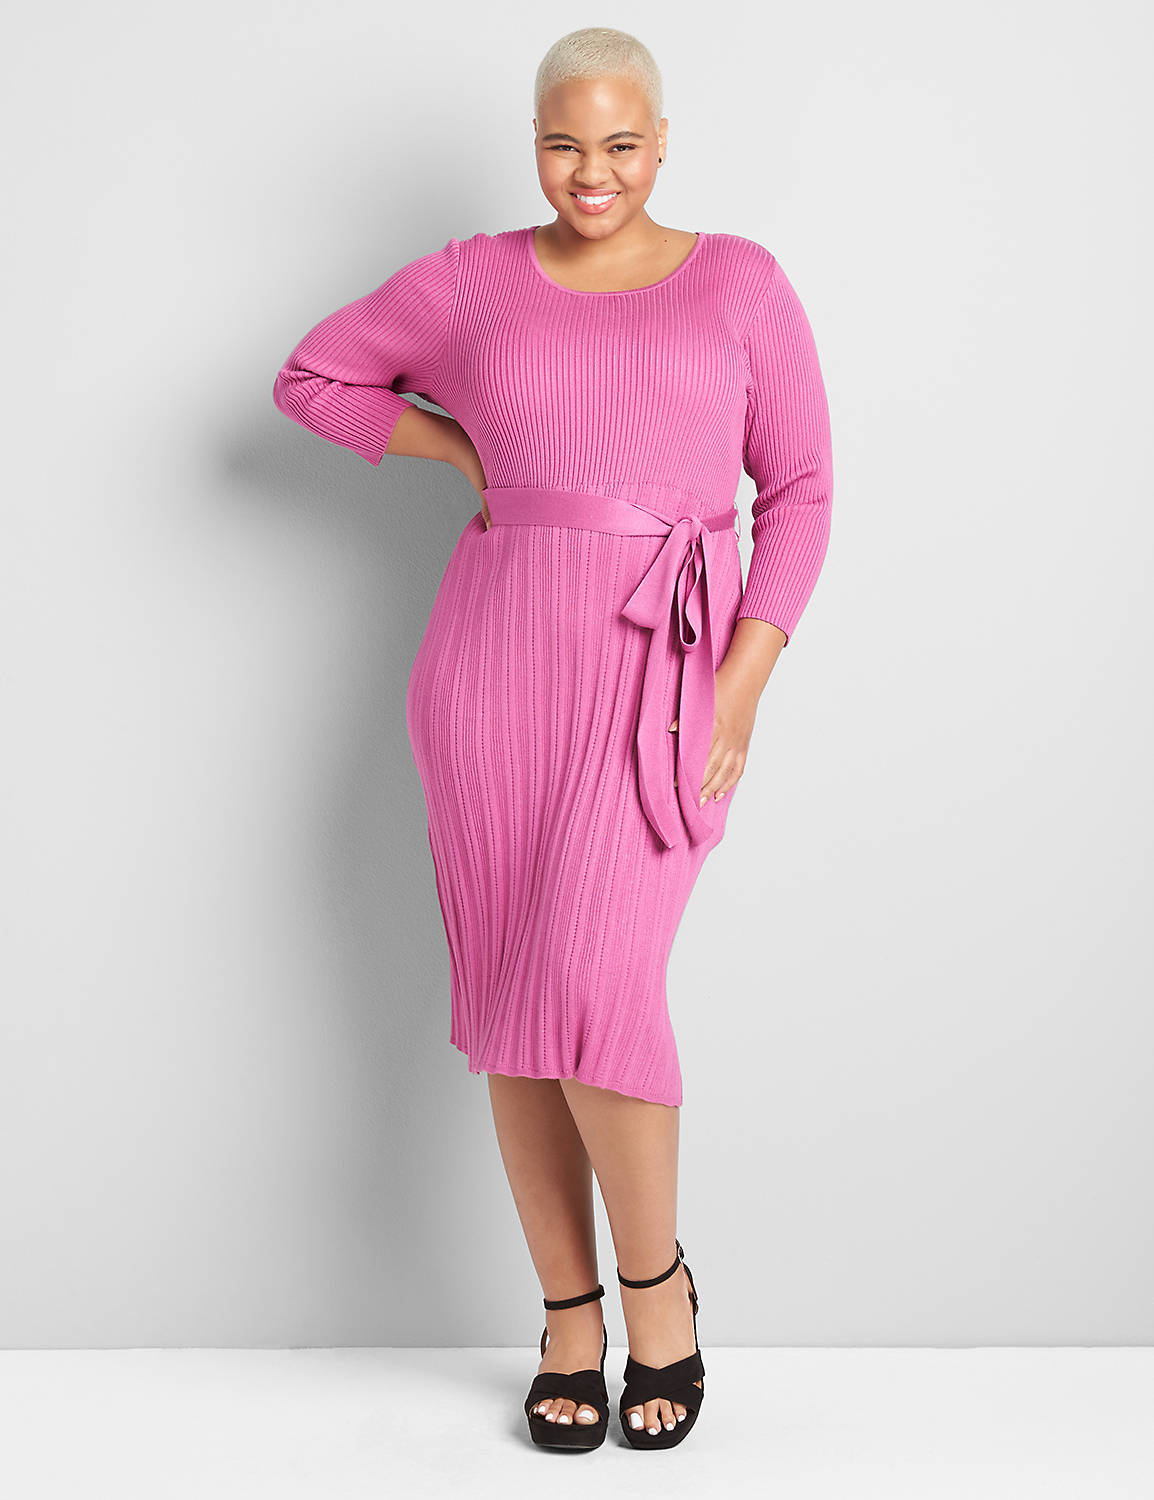 Ribbed Mix Sweater Dress Product Image 1